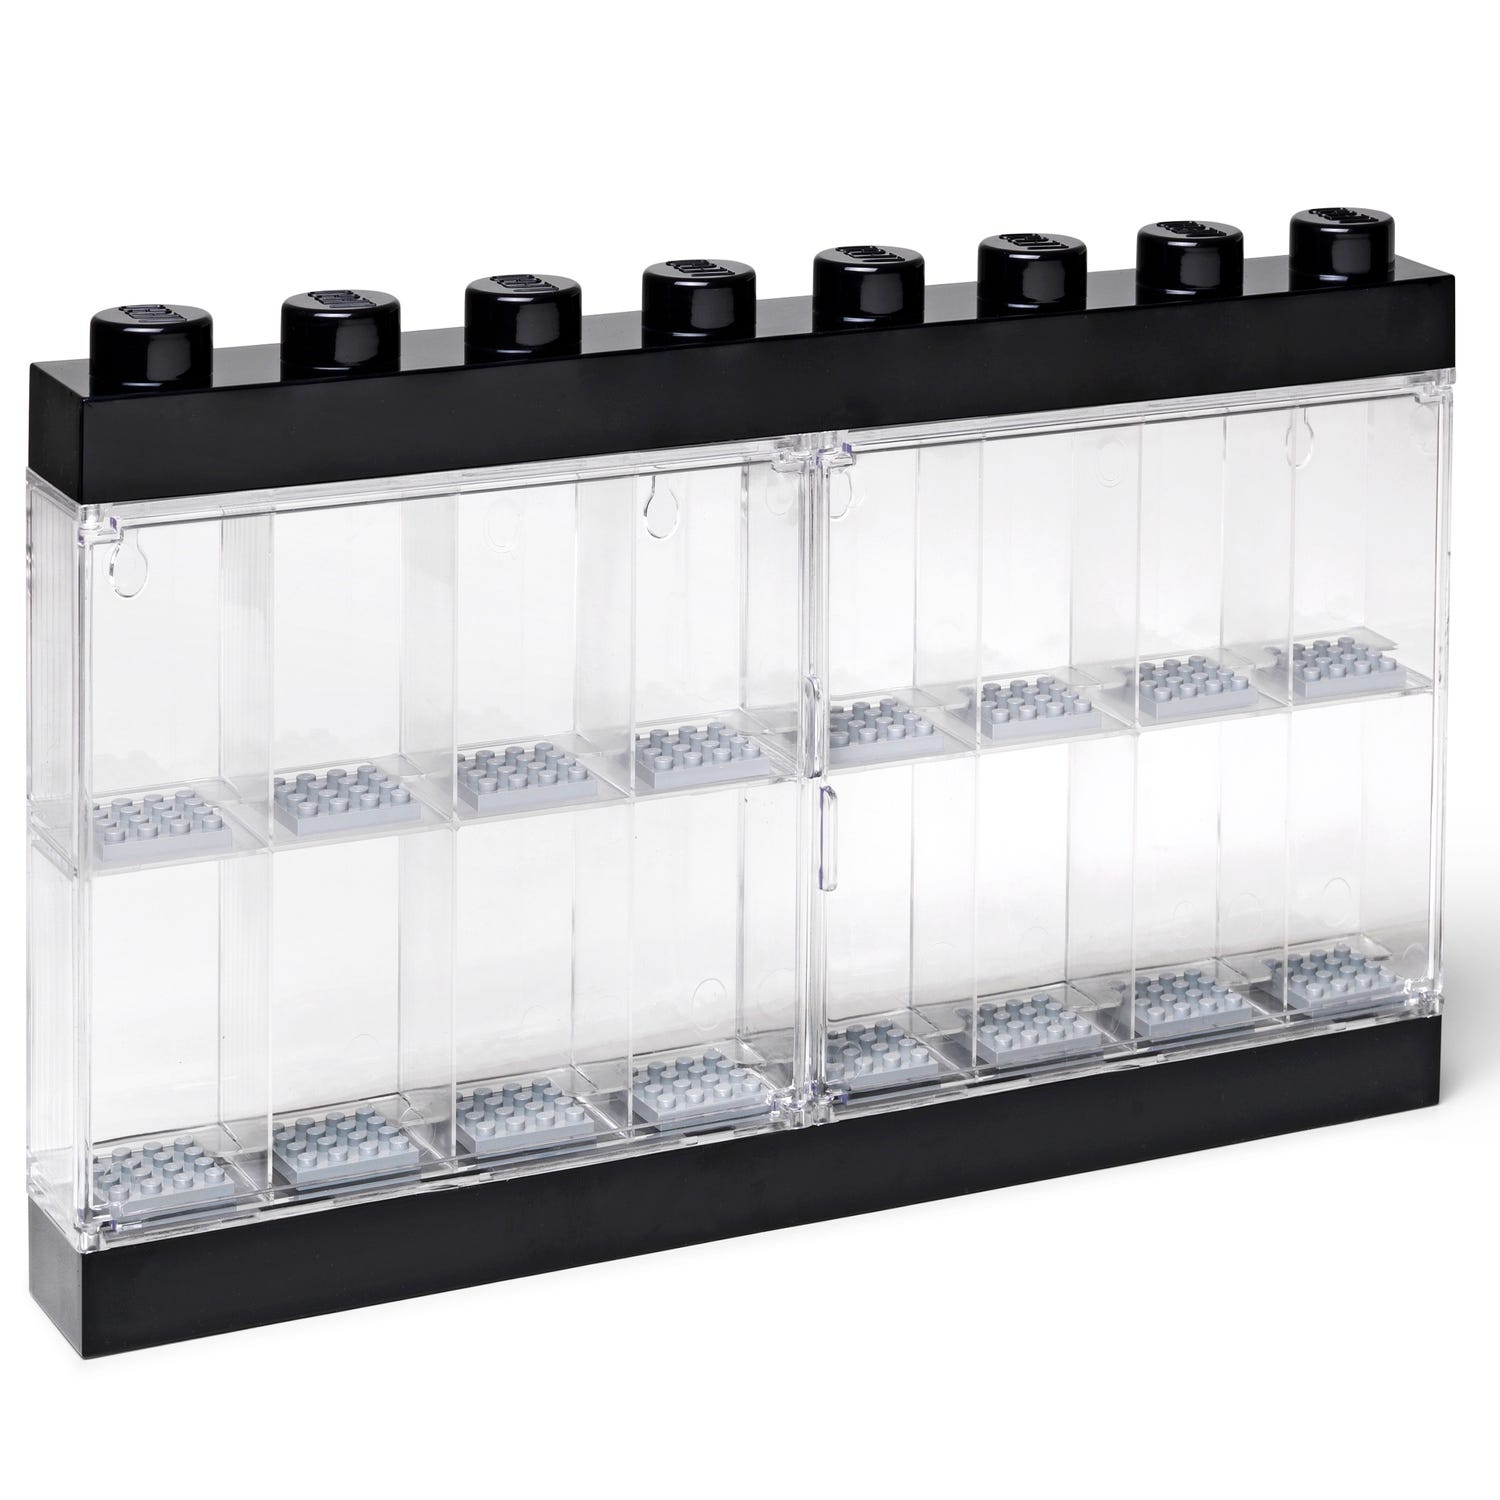 Display Cases for Lego -  Canada